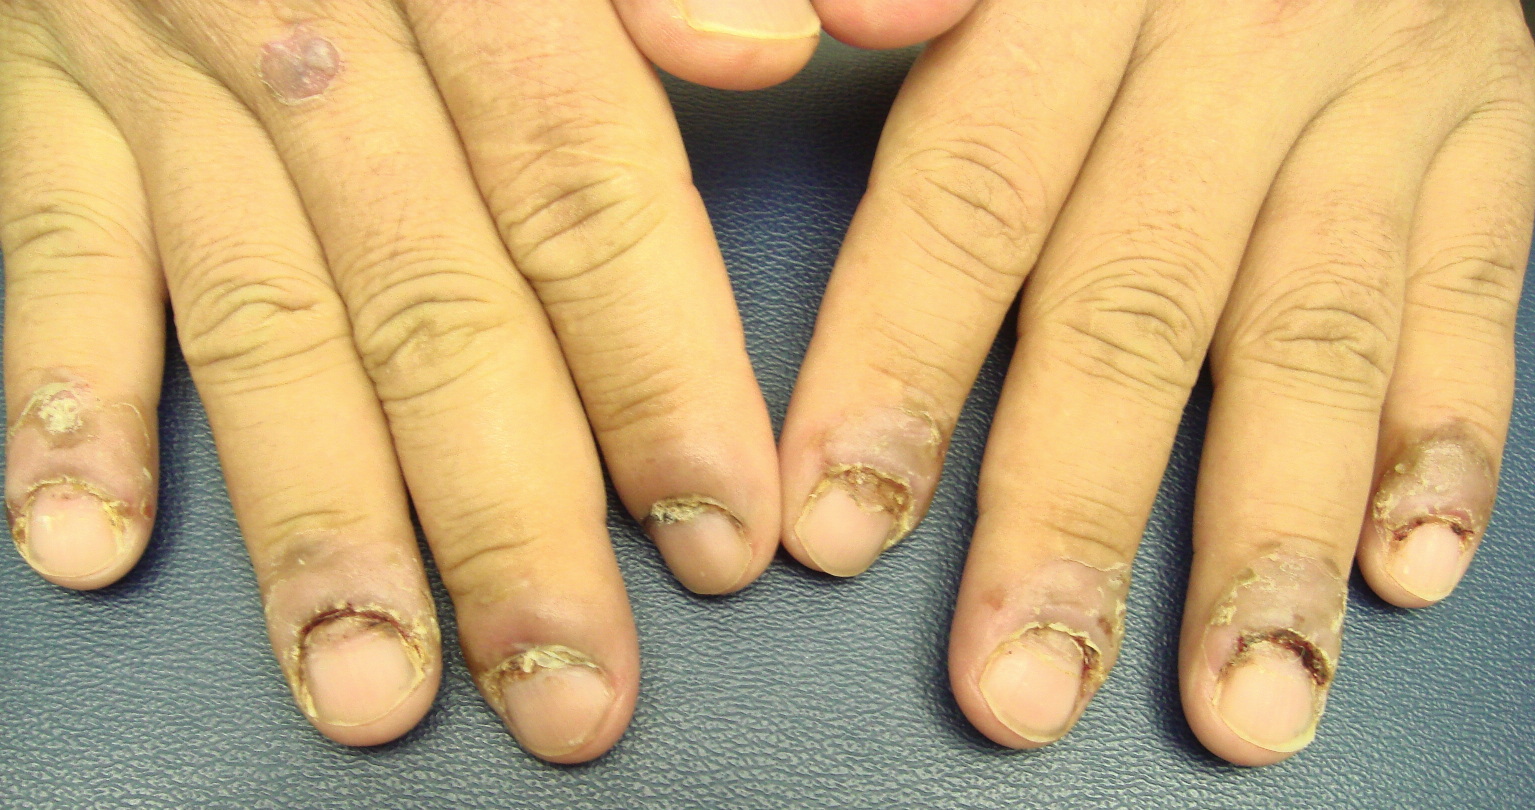 PDF] Early Stage Disease Diagnosis System Using Human Nail Image Processing  | Semantic Scholar